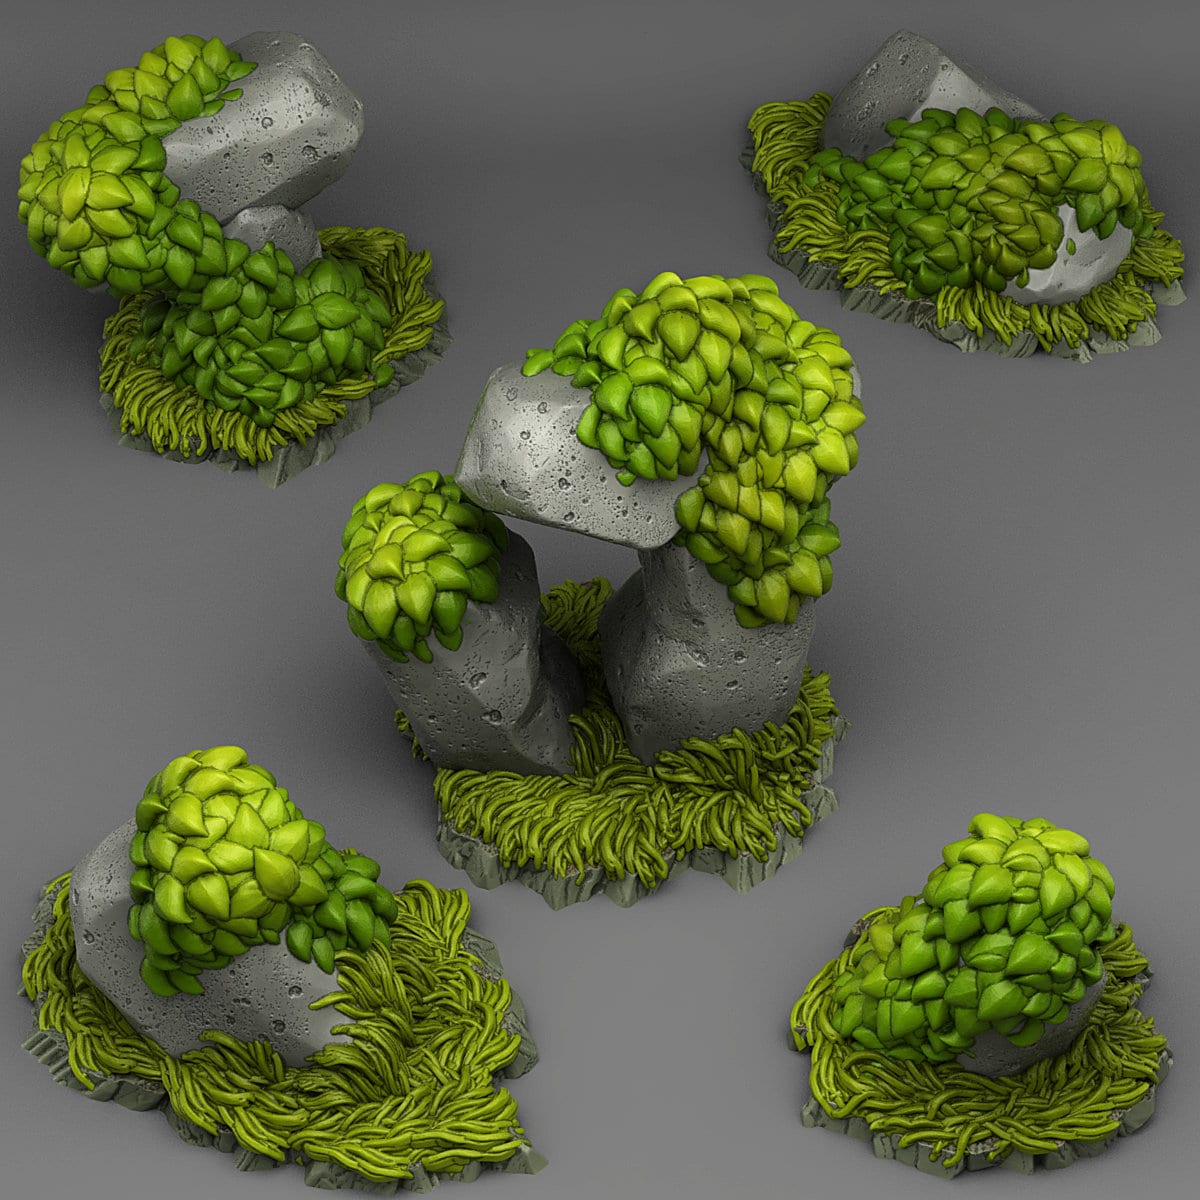 Grassy Rocks Scatter Terrain - Fantastic Plants and Rocks | Print Your Monsters | DnD | Wargaming | Moss